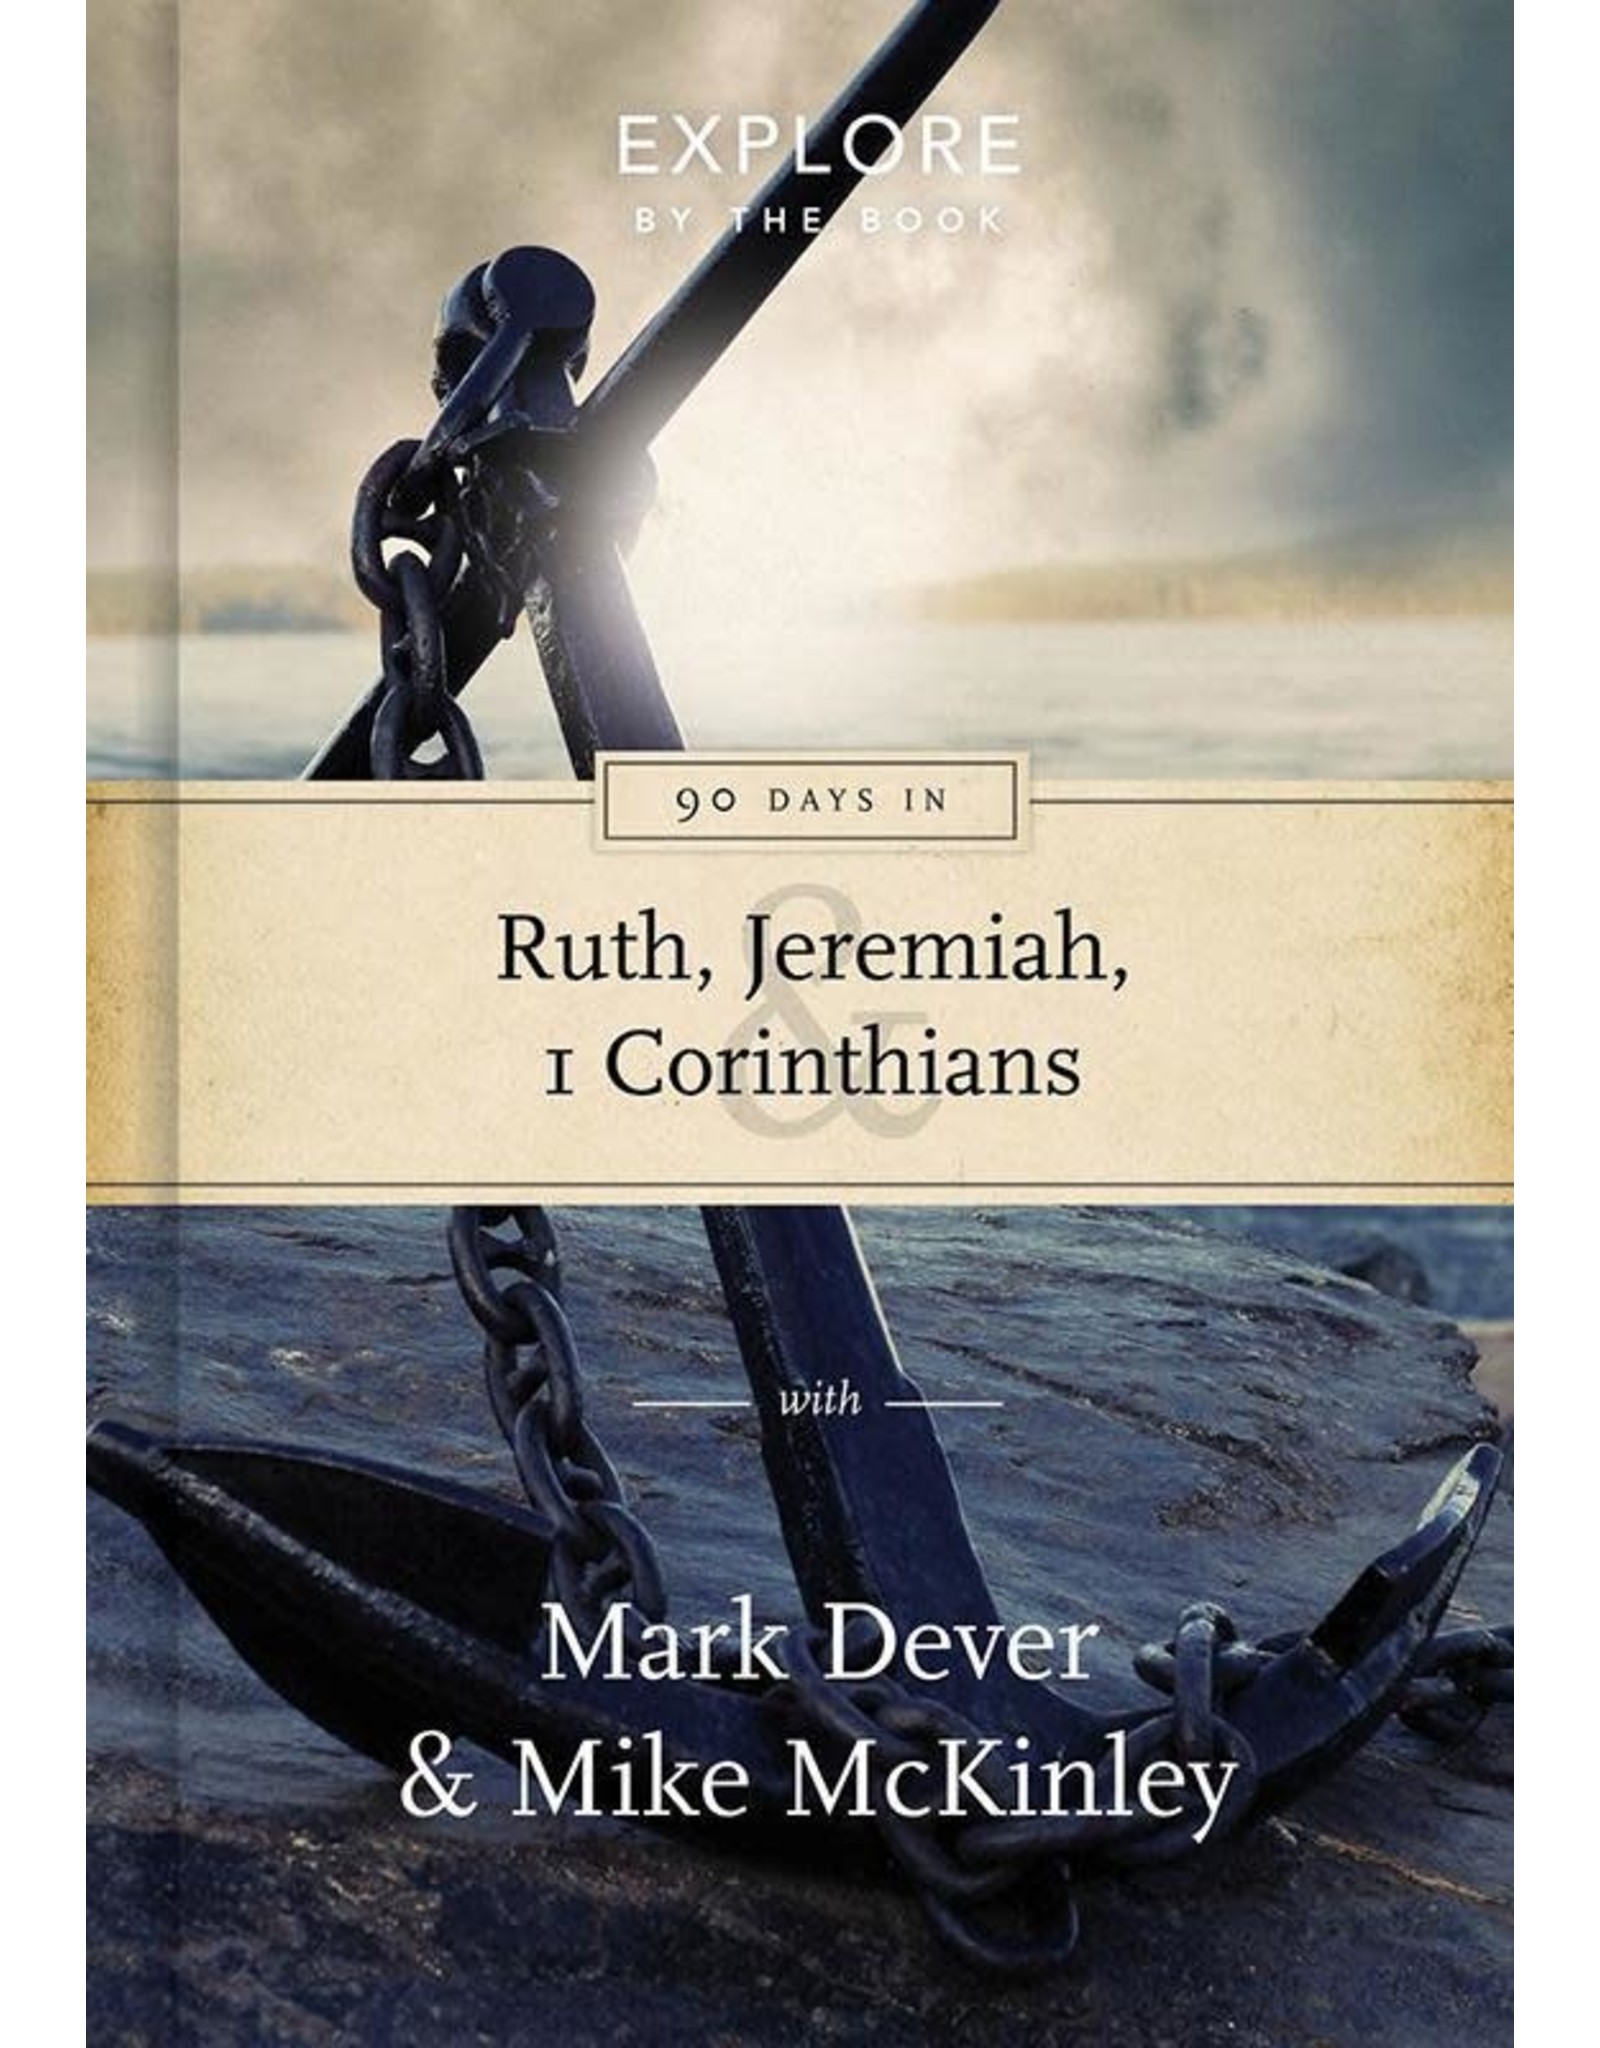 The Good Book Company 90 Days in Ruth, Jeremiah & 1 Corinthians: Draw strength from God’s word (Explore by the book)